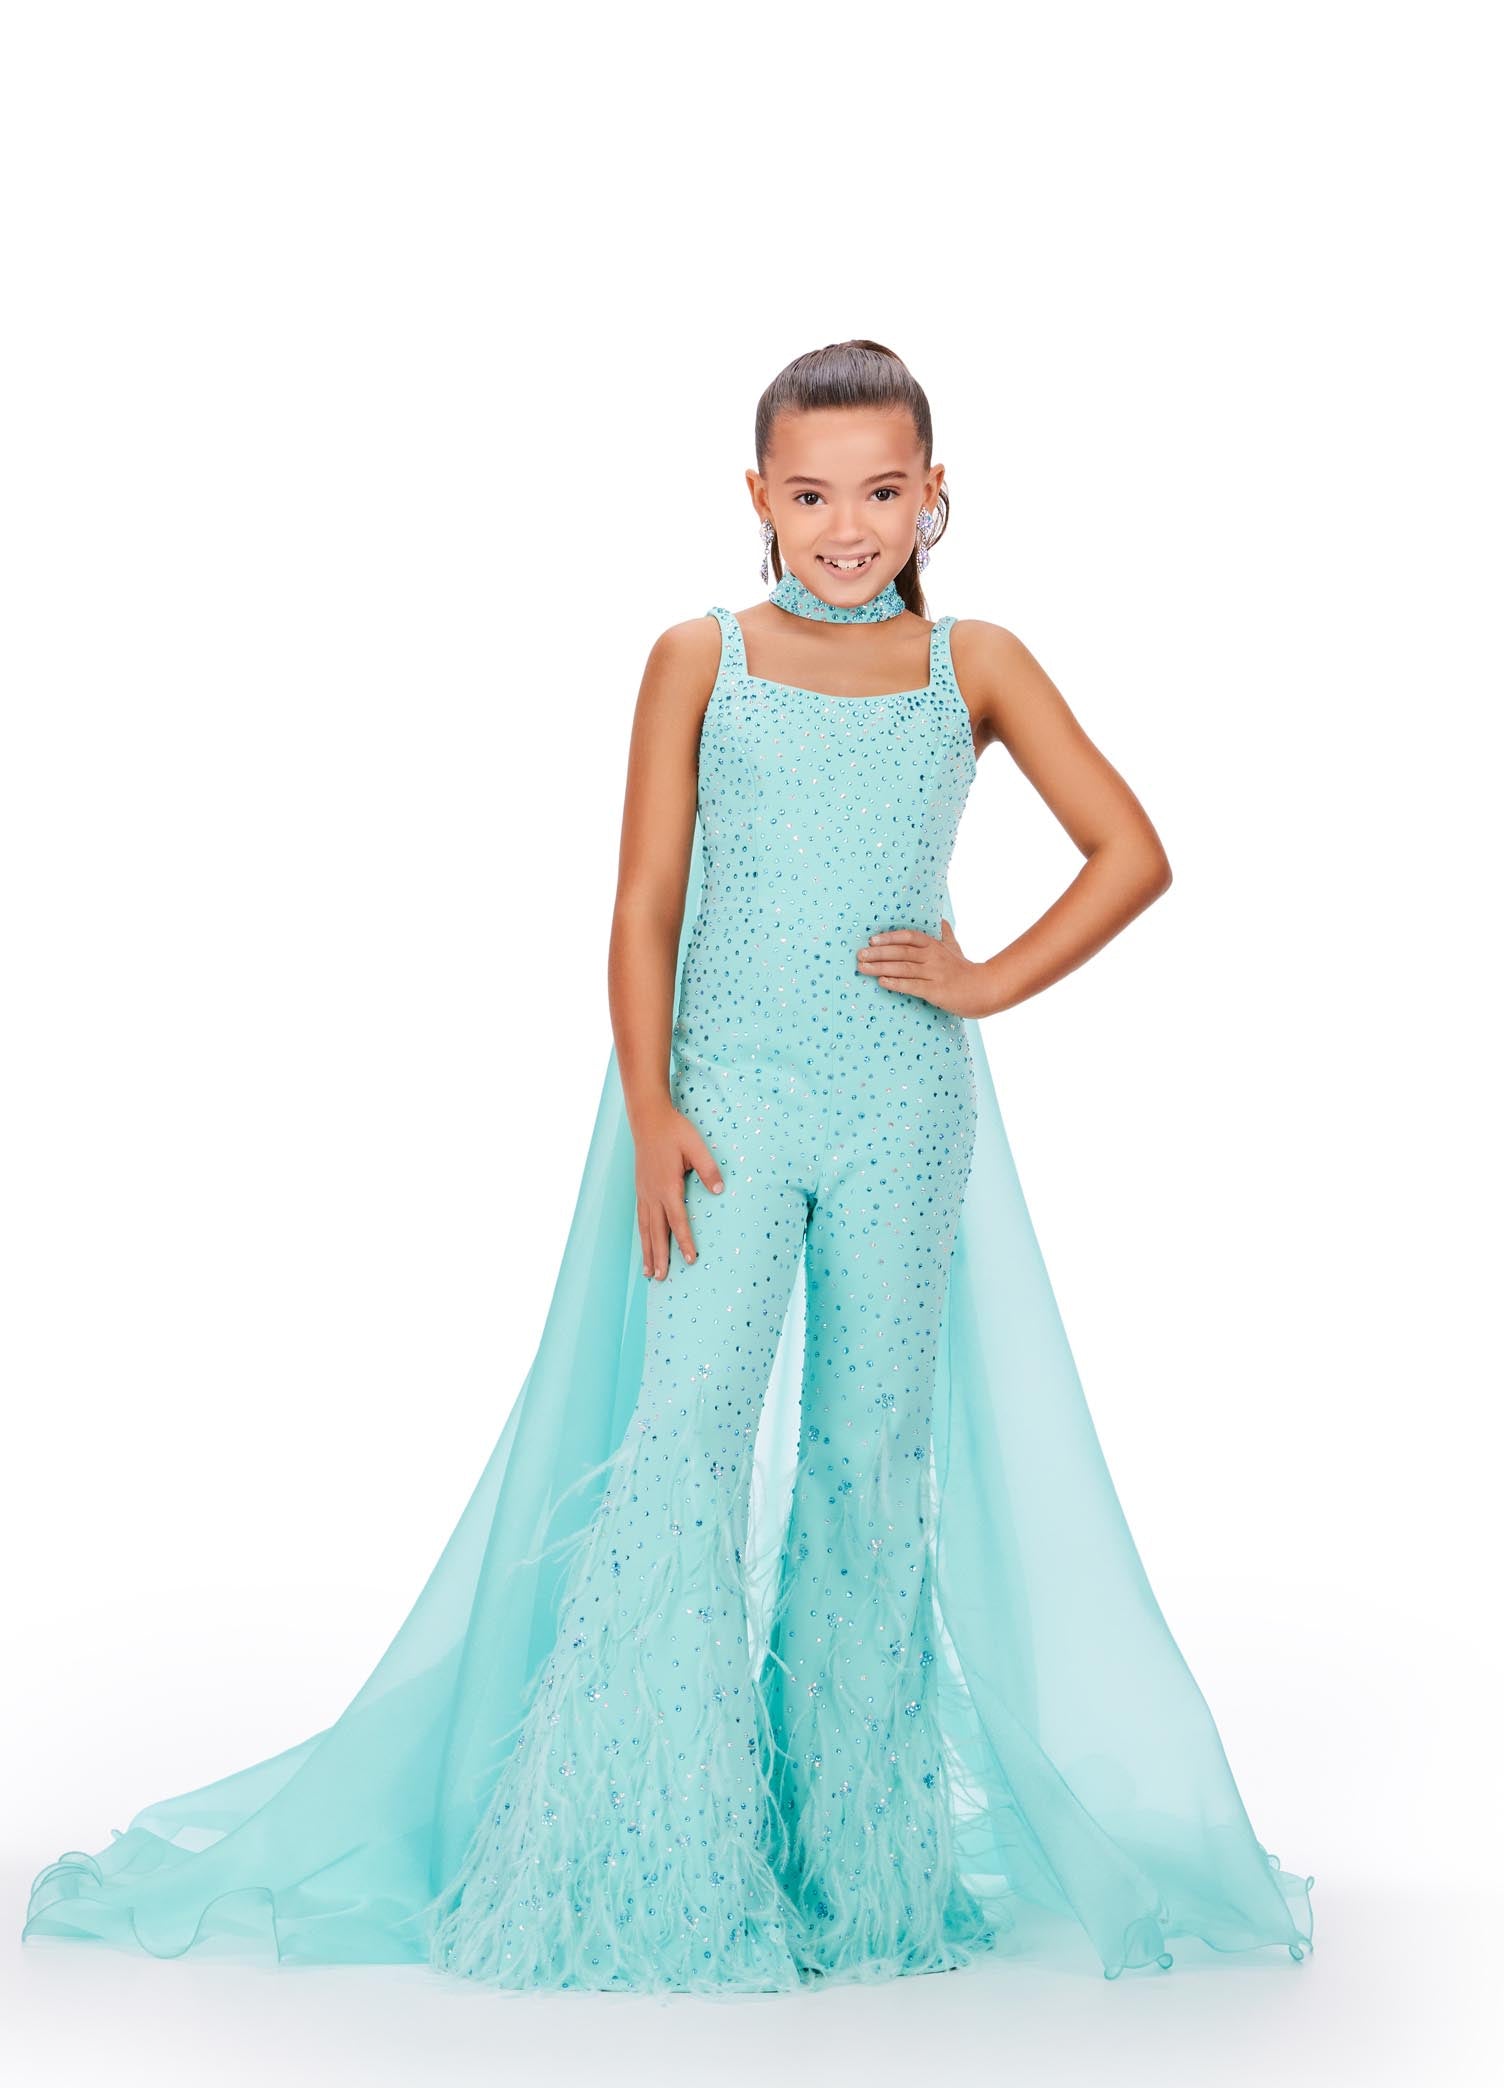 Ashley Lauren Kids 8210 Long Girls Pageant Jumpsuit with Crystal embellishements and a scoop neckline. Feather Embellished flared Bell Bottoms with a choker embellished with crystals and organza Cape.  Sizes: 12  Colors: Aqua